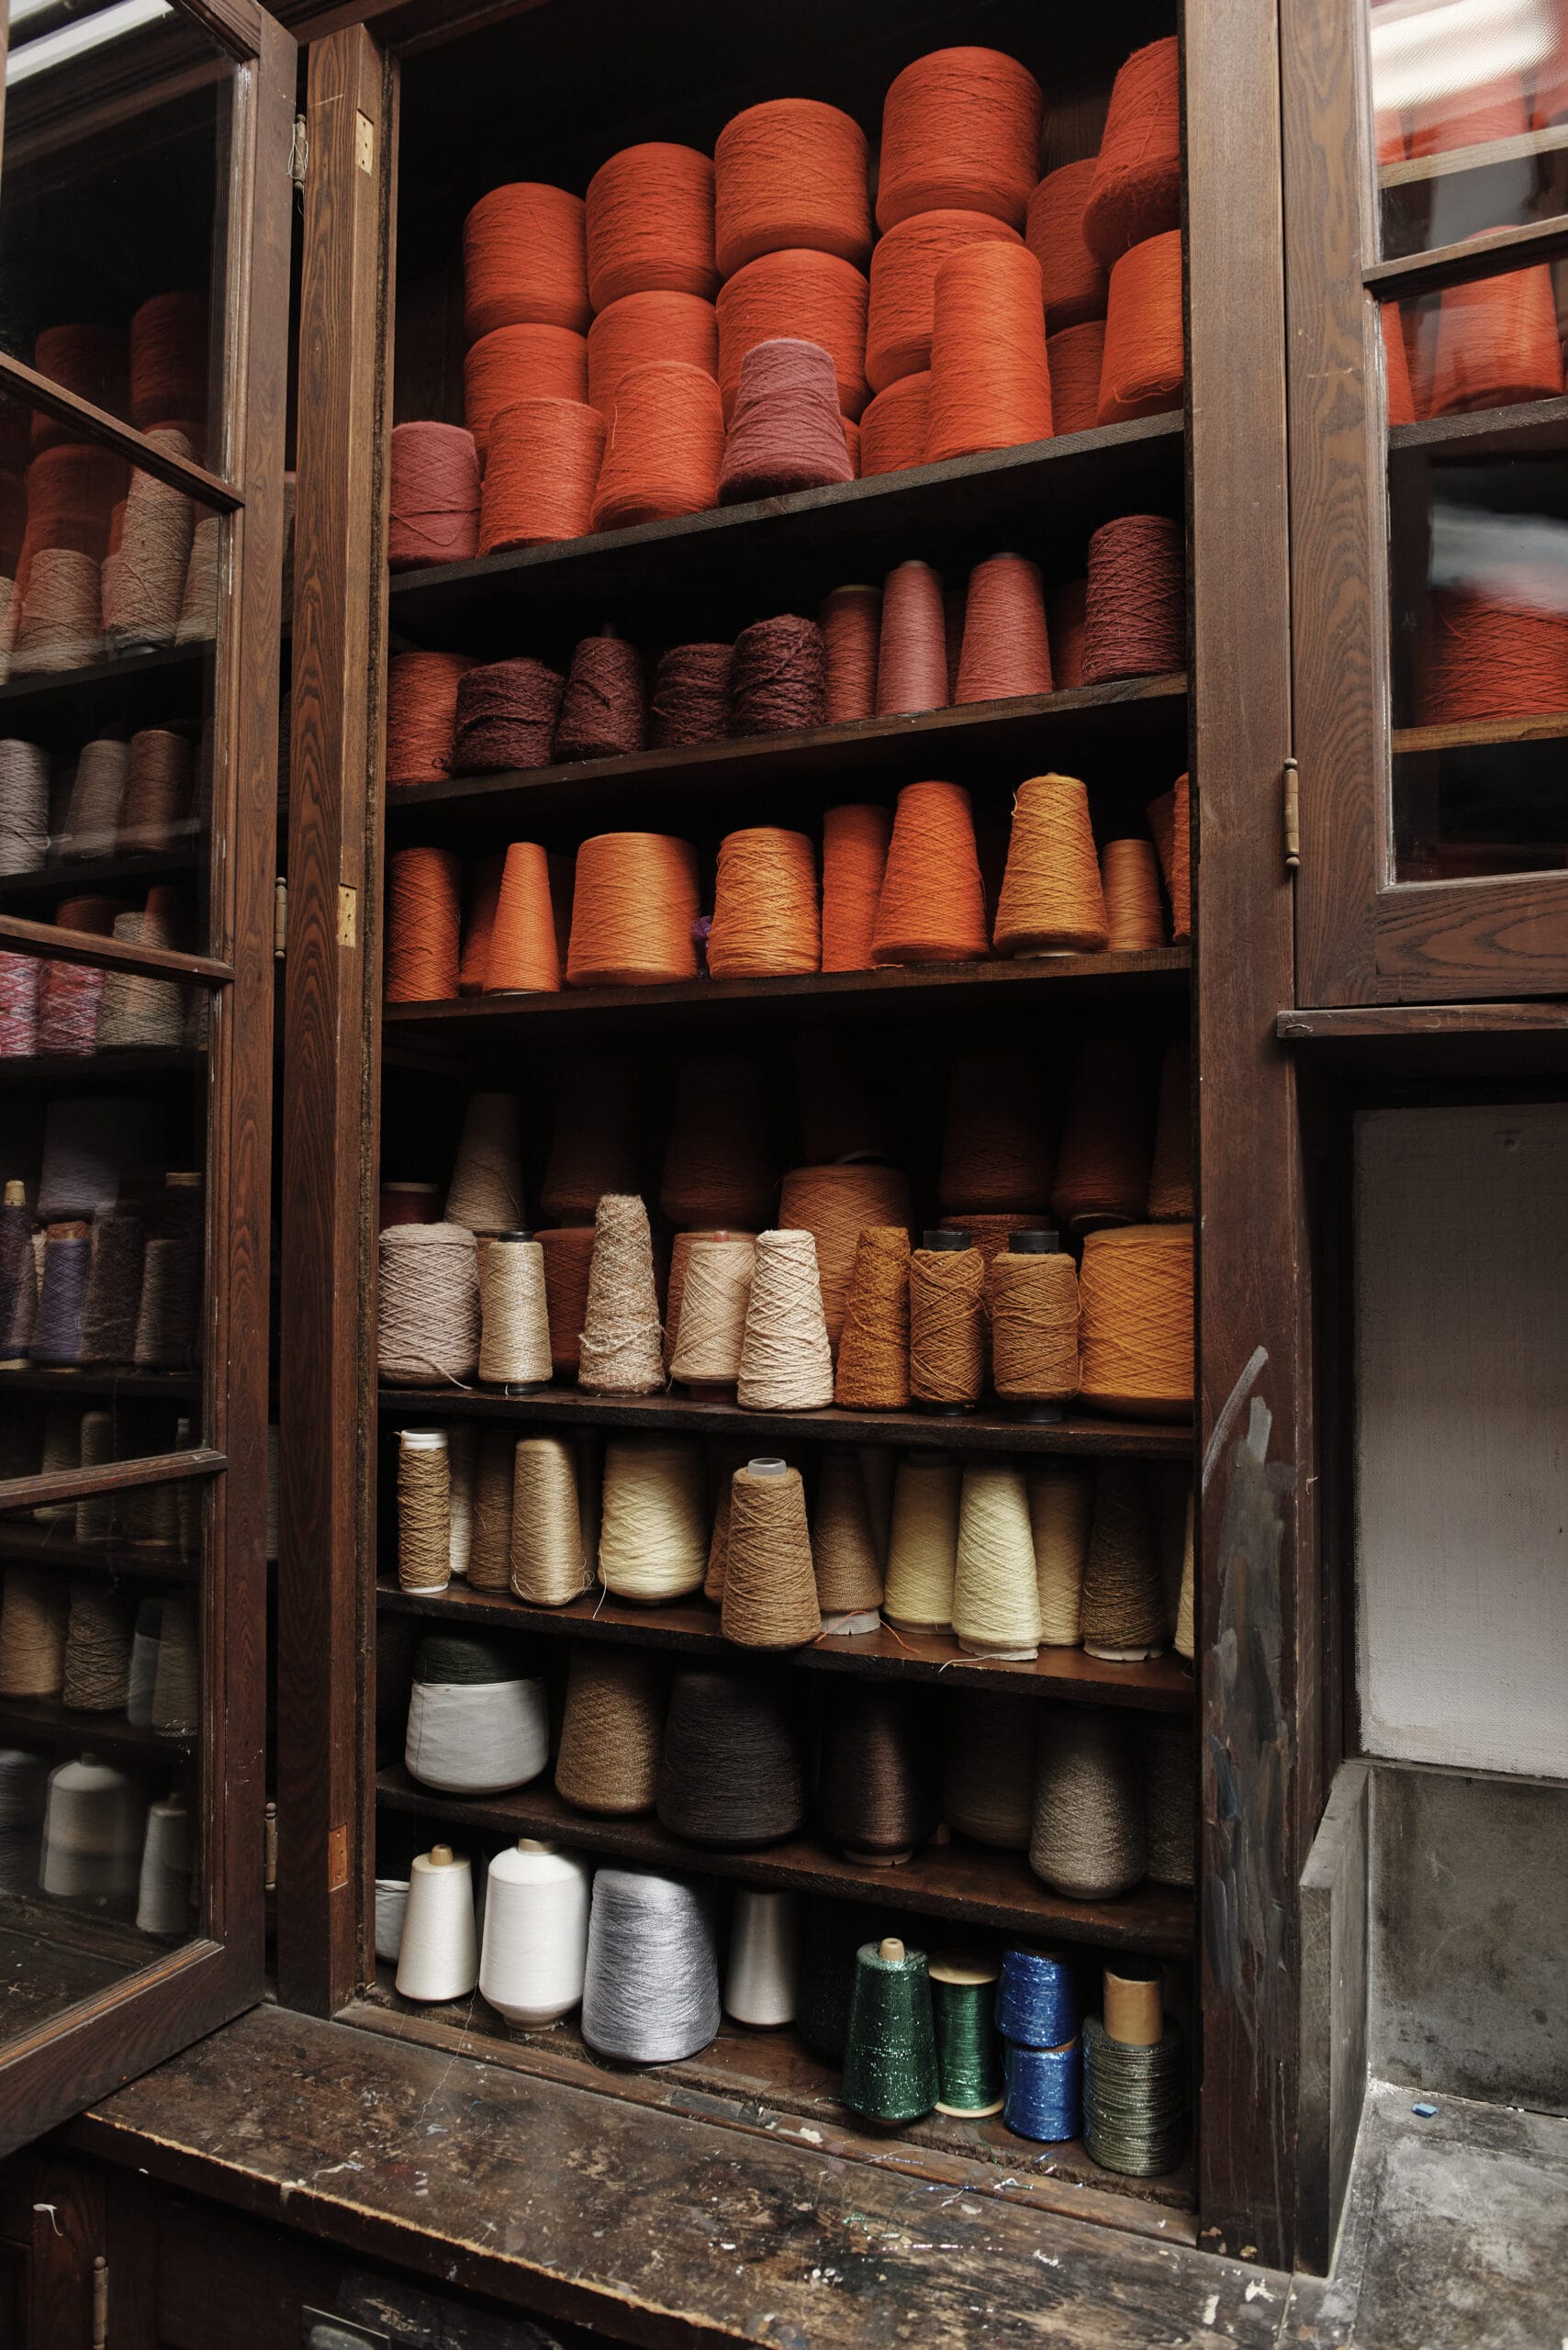 Red and orange yarn spools lined up neatly on shelves in a cabinet